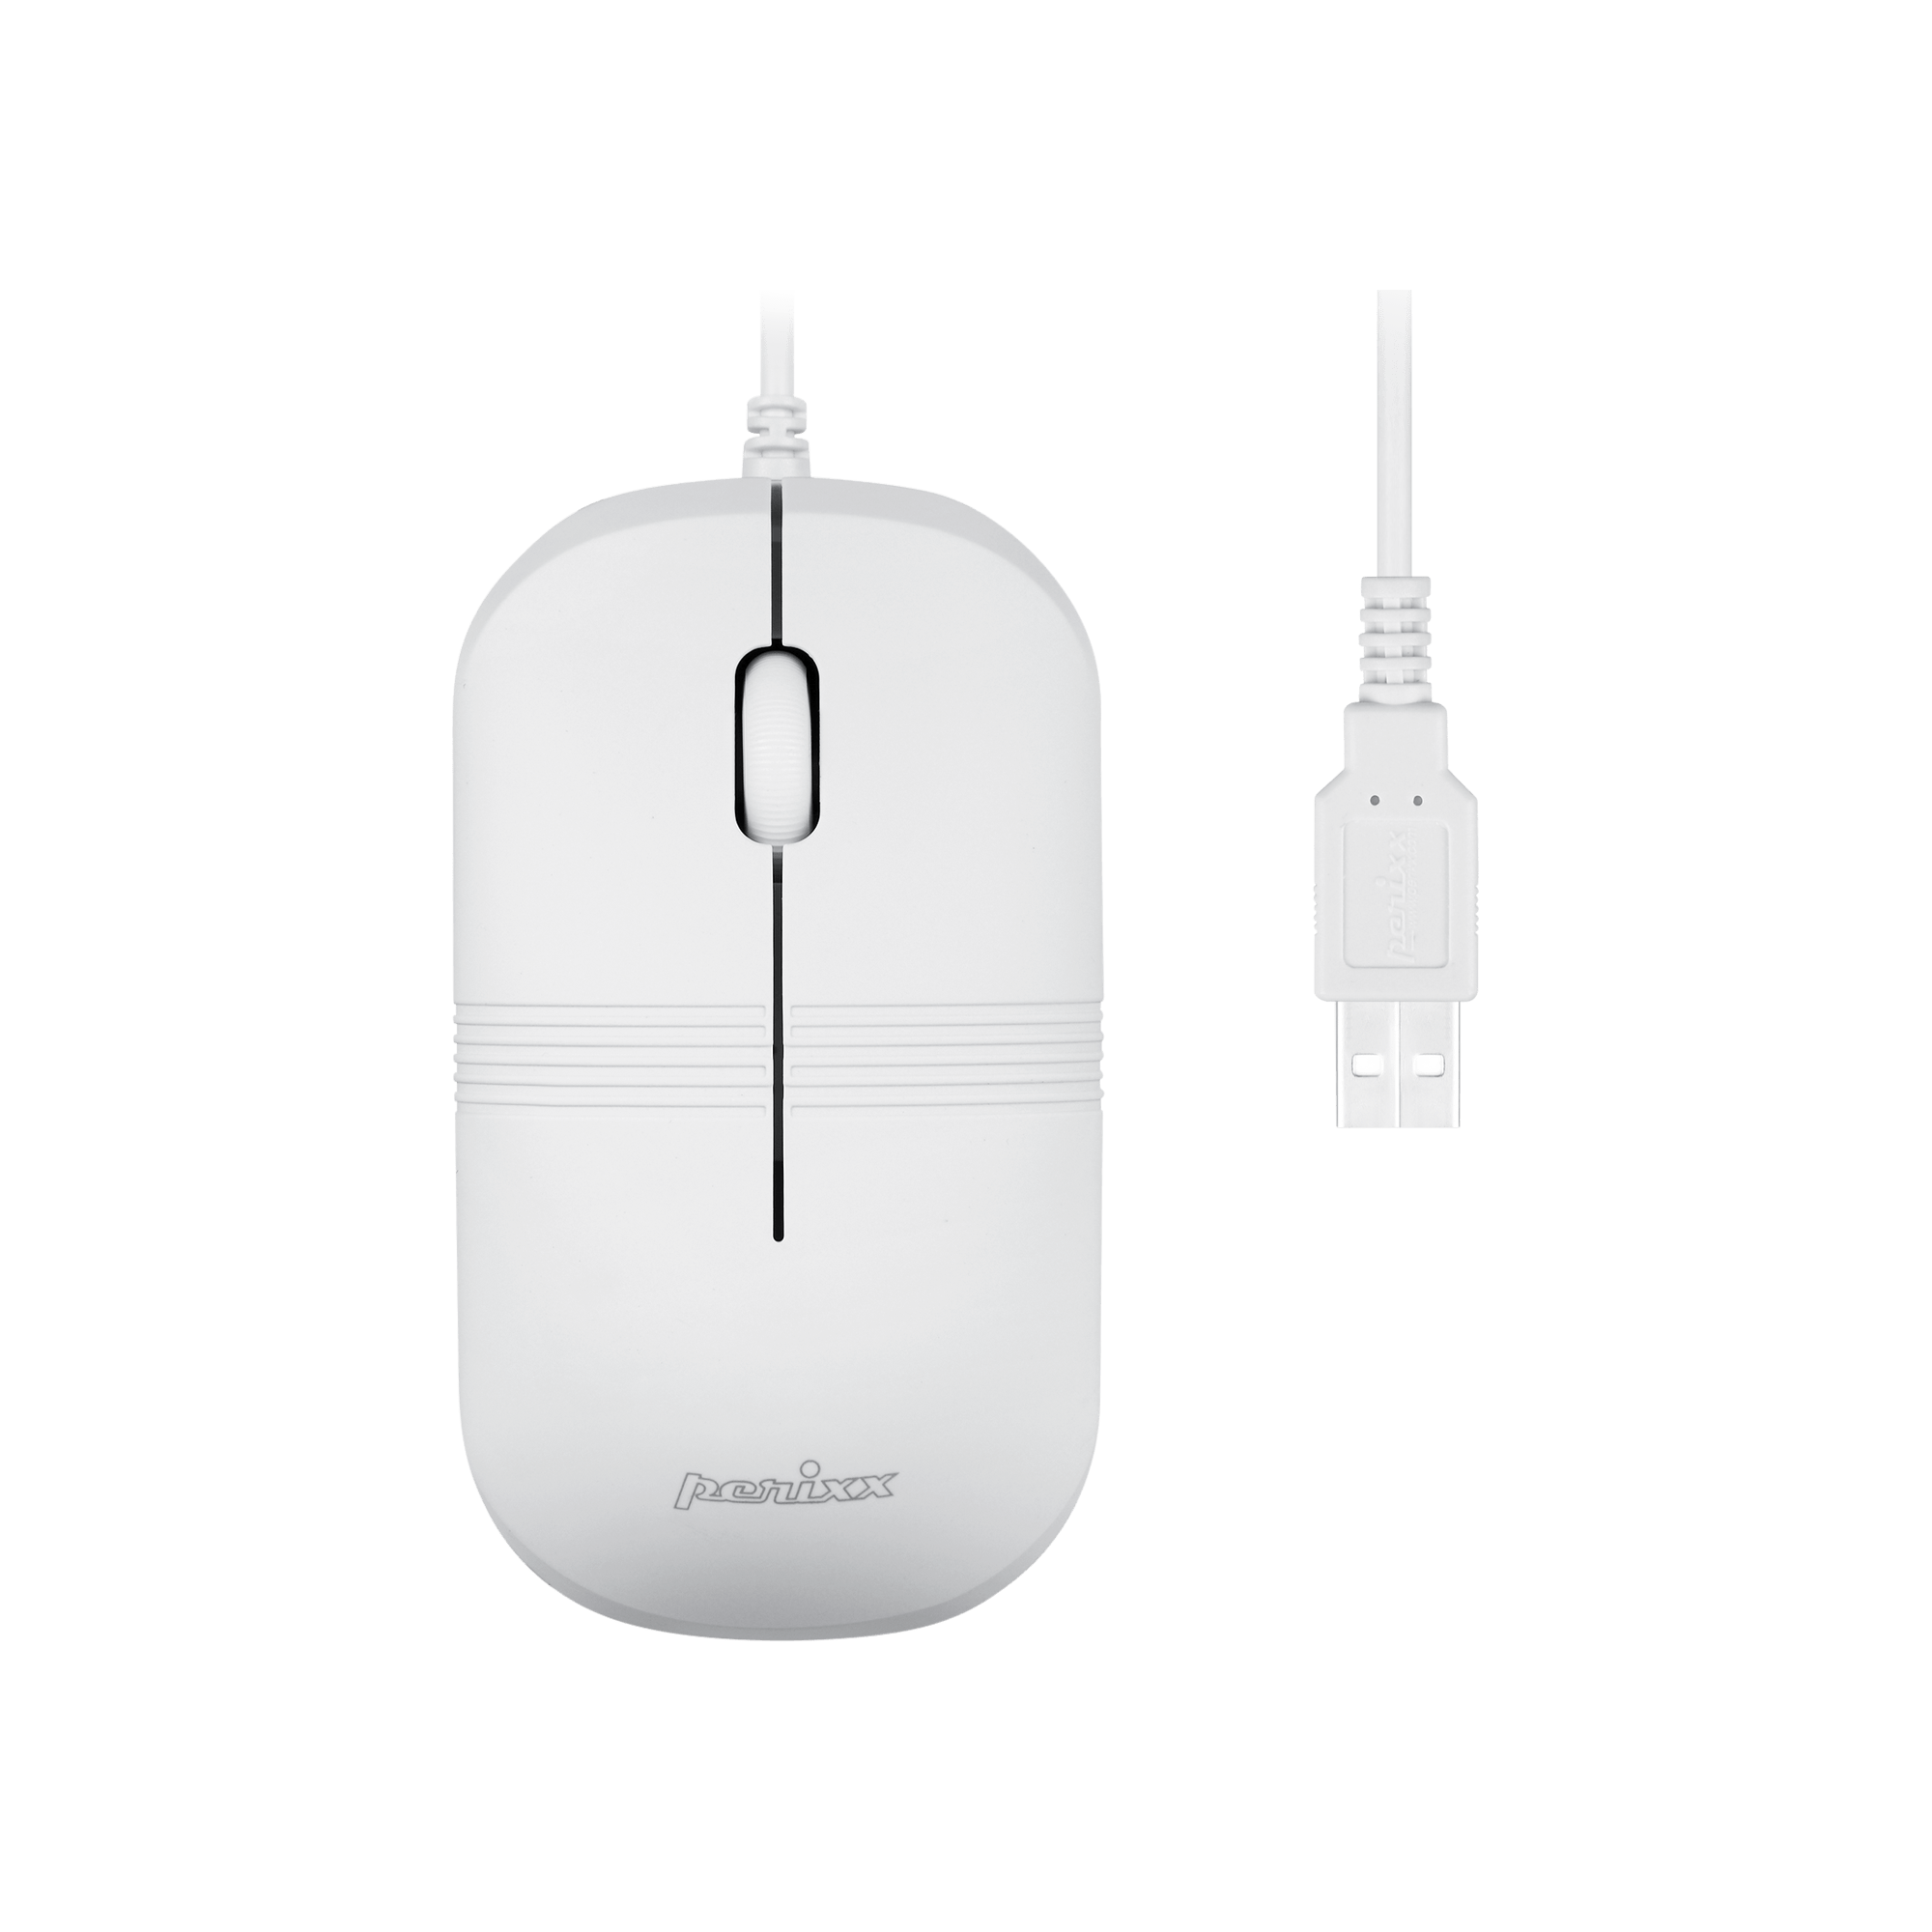 PERIMICE-503 W - Wired White Waterproof Mouse - Perixx Europe